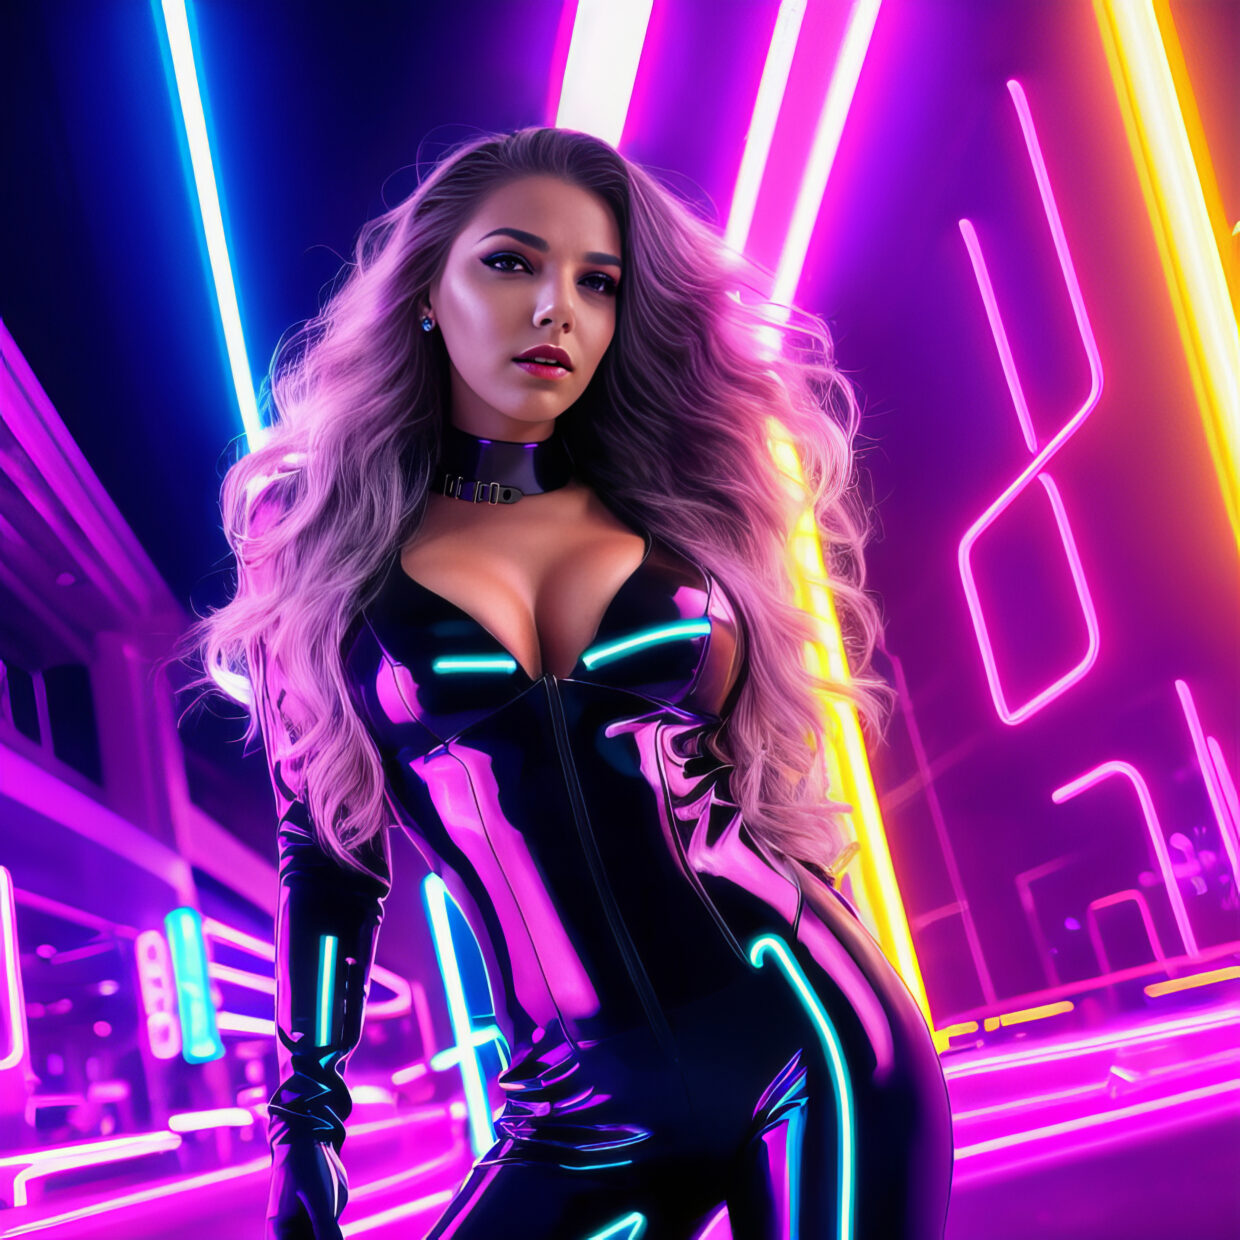 3Daizy in a sleek, black latex bodysuit, illuminated by the neon glow of the city.